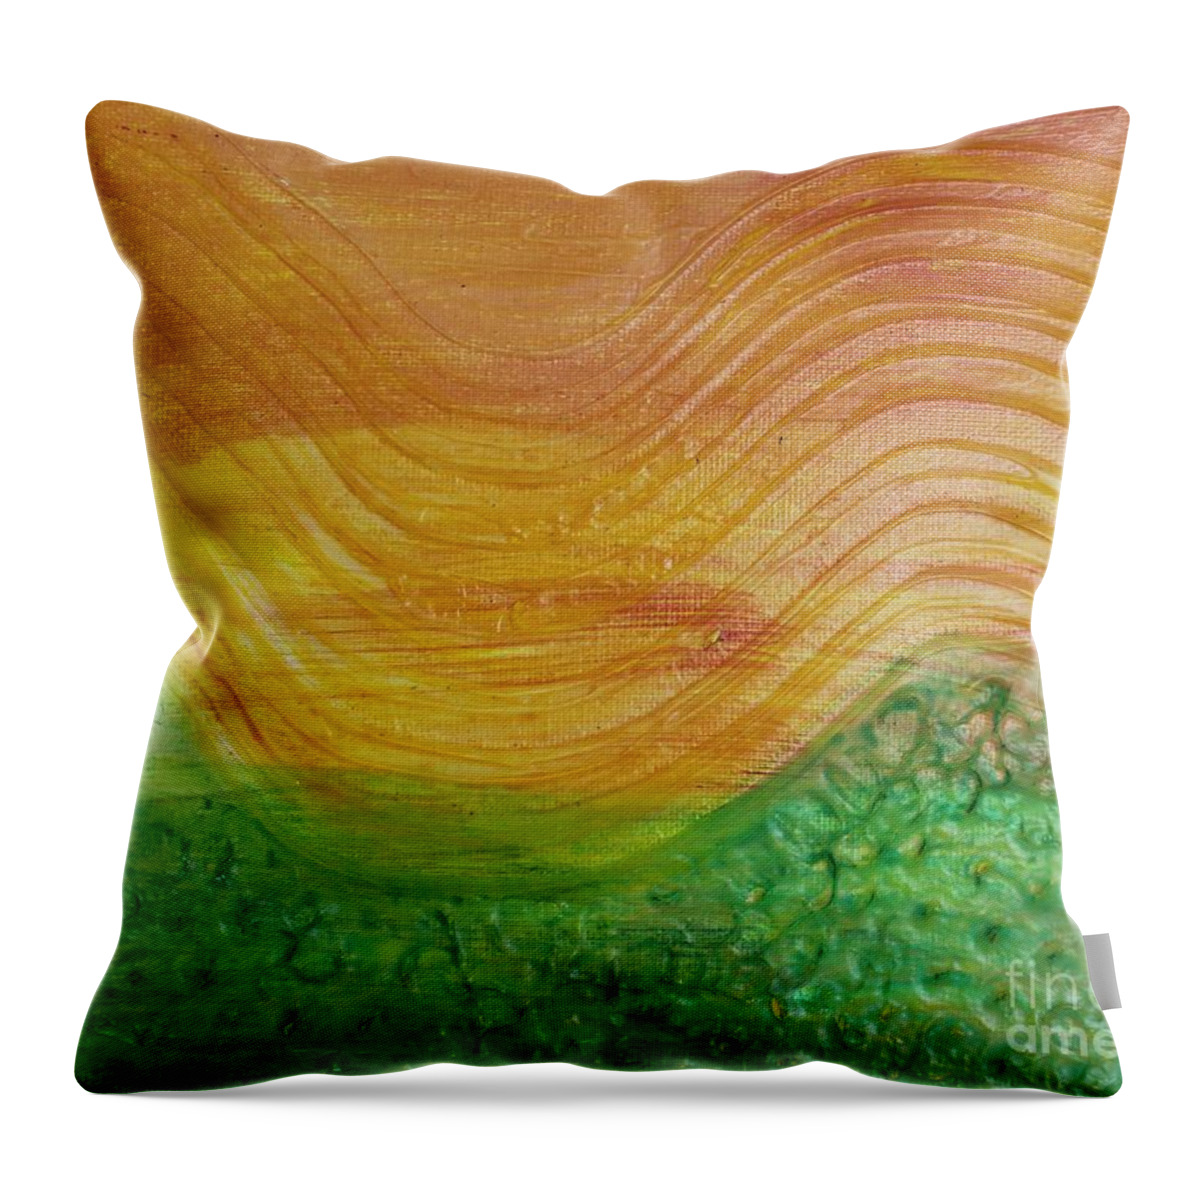 Sun Throw Pillow featuring the painting Sun and Grass in Harmony by Sarahleah Hankes